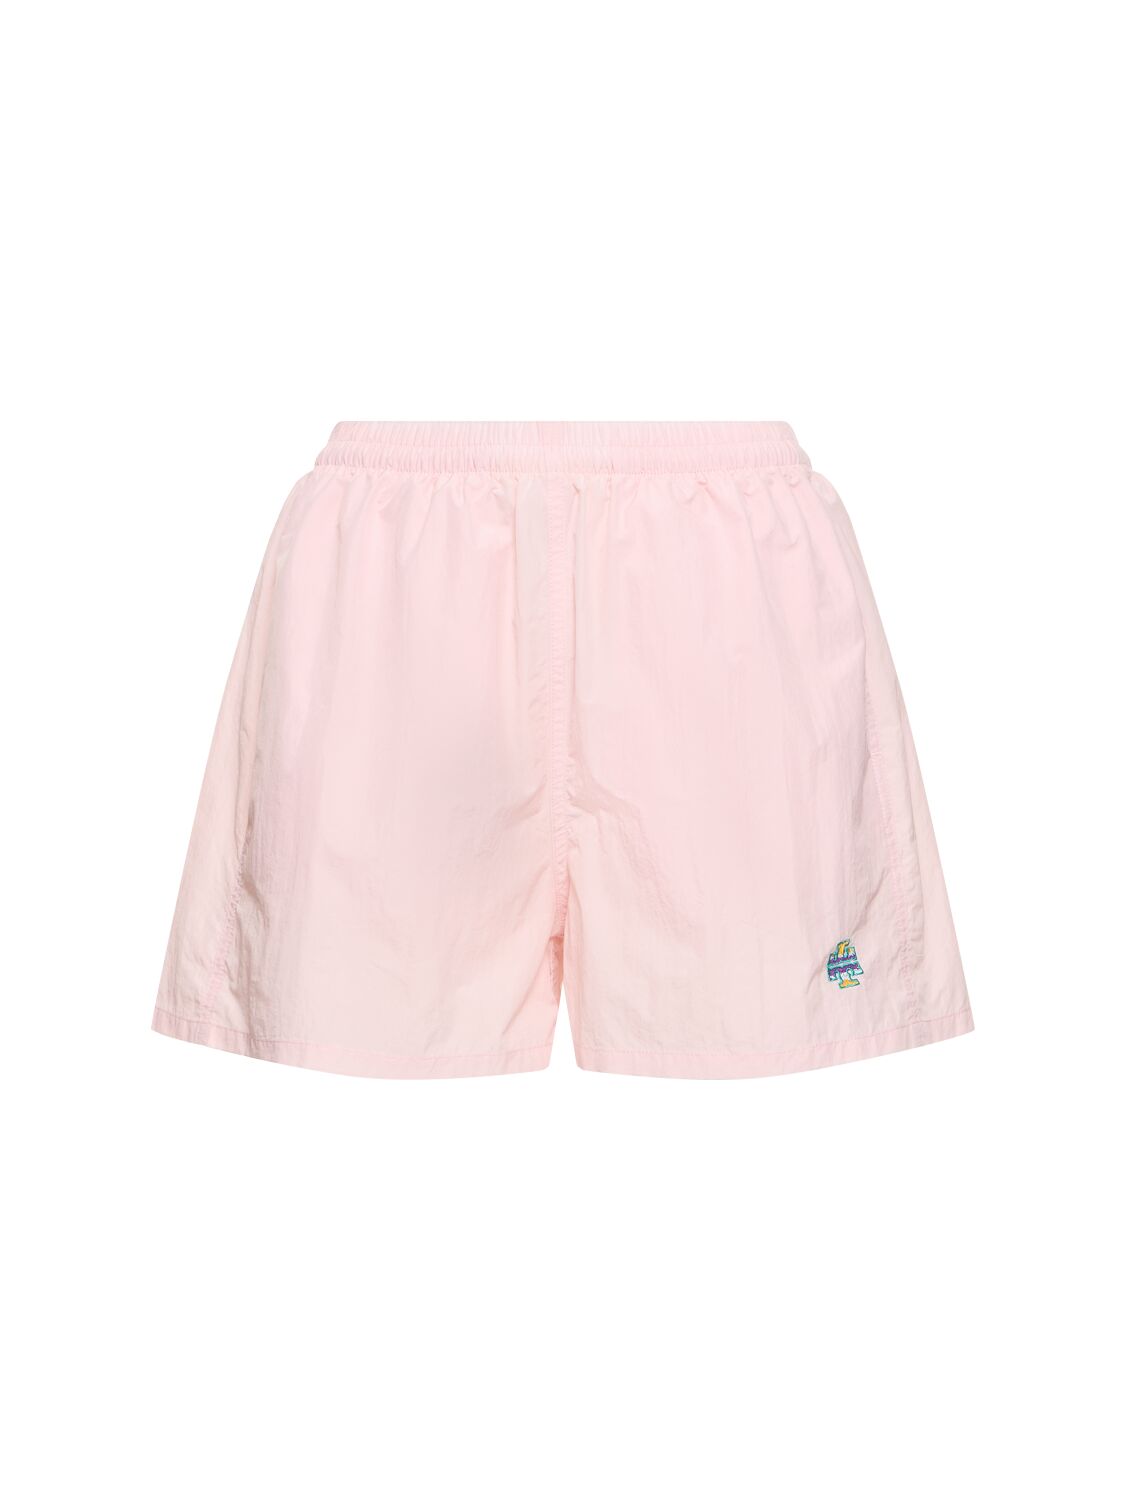 Tory Sport Nylon Camp Shorts In Pink